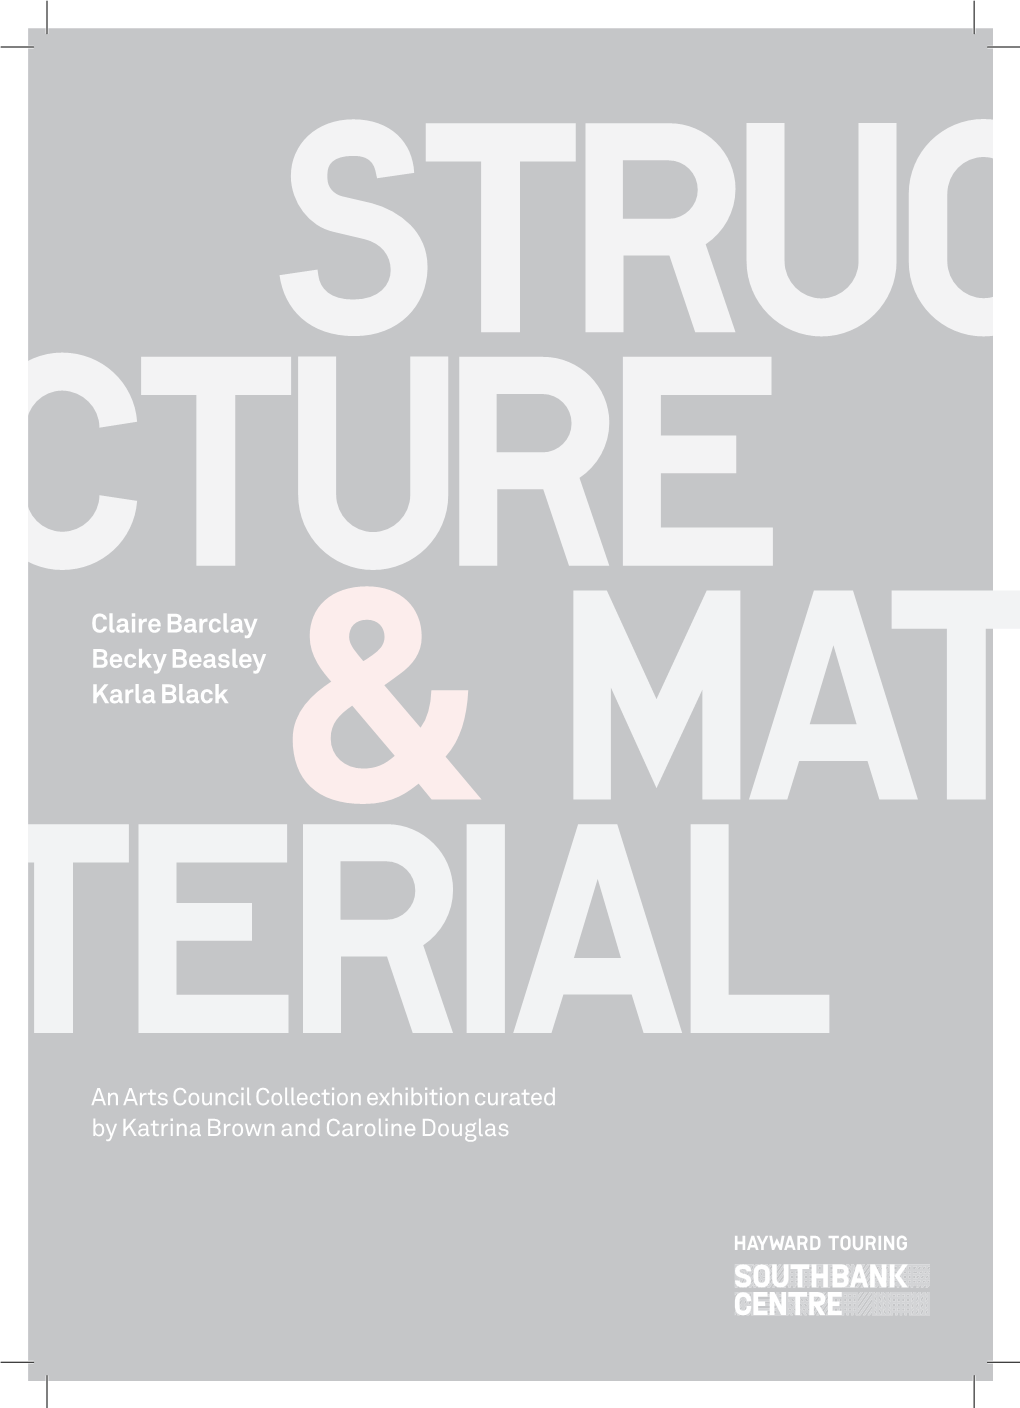 21708.1 Structure & Material Exhibition Leaflet CS5.Indd